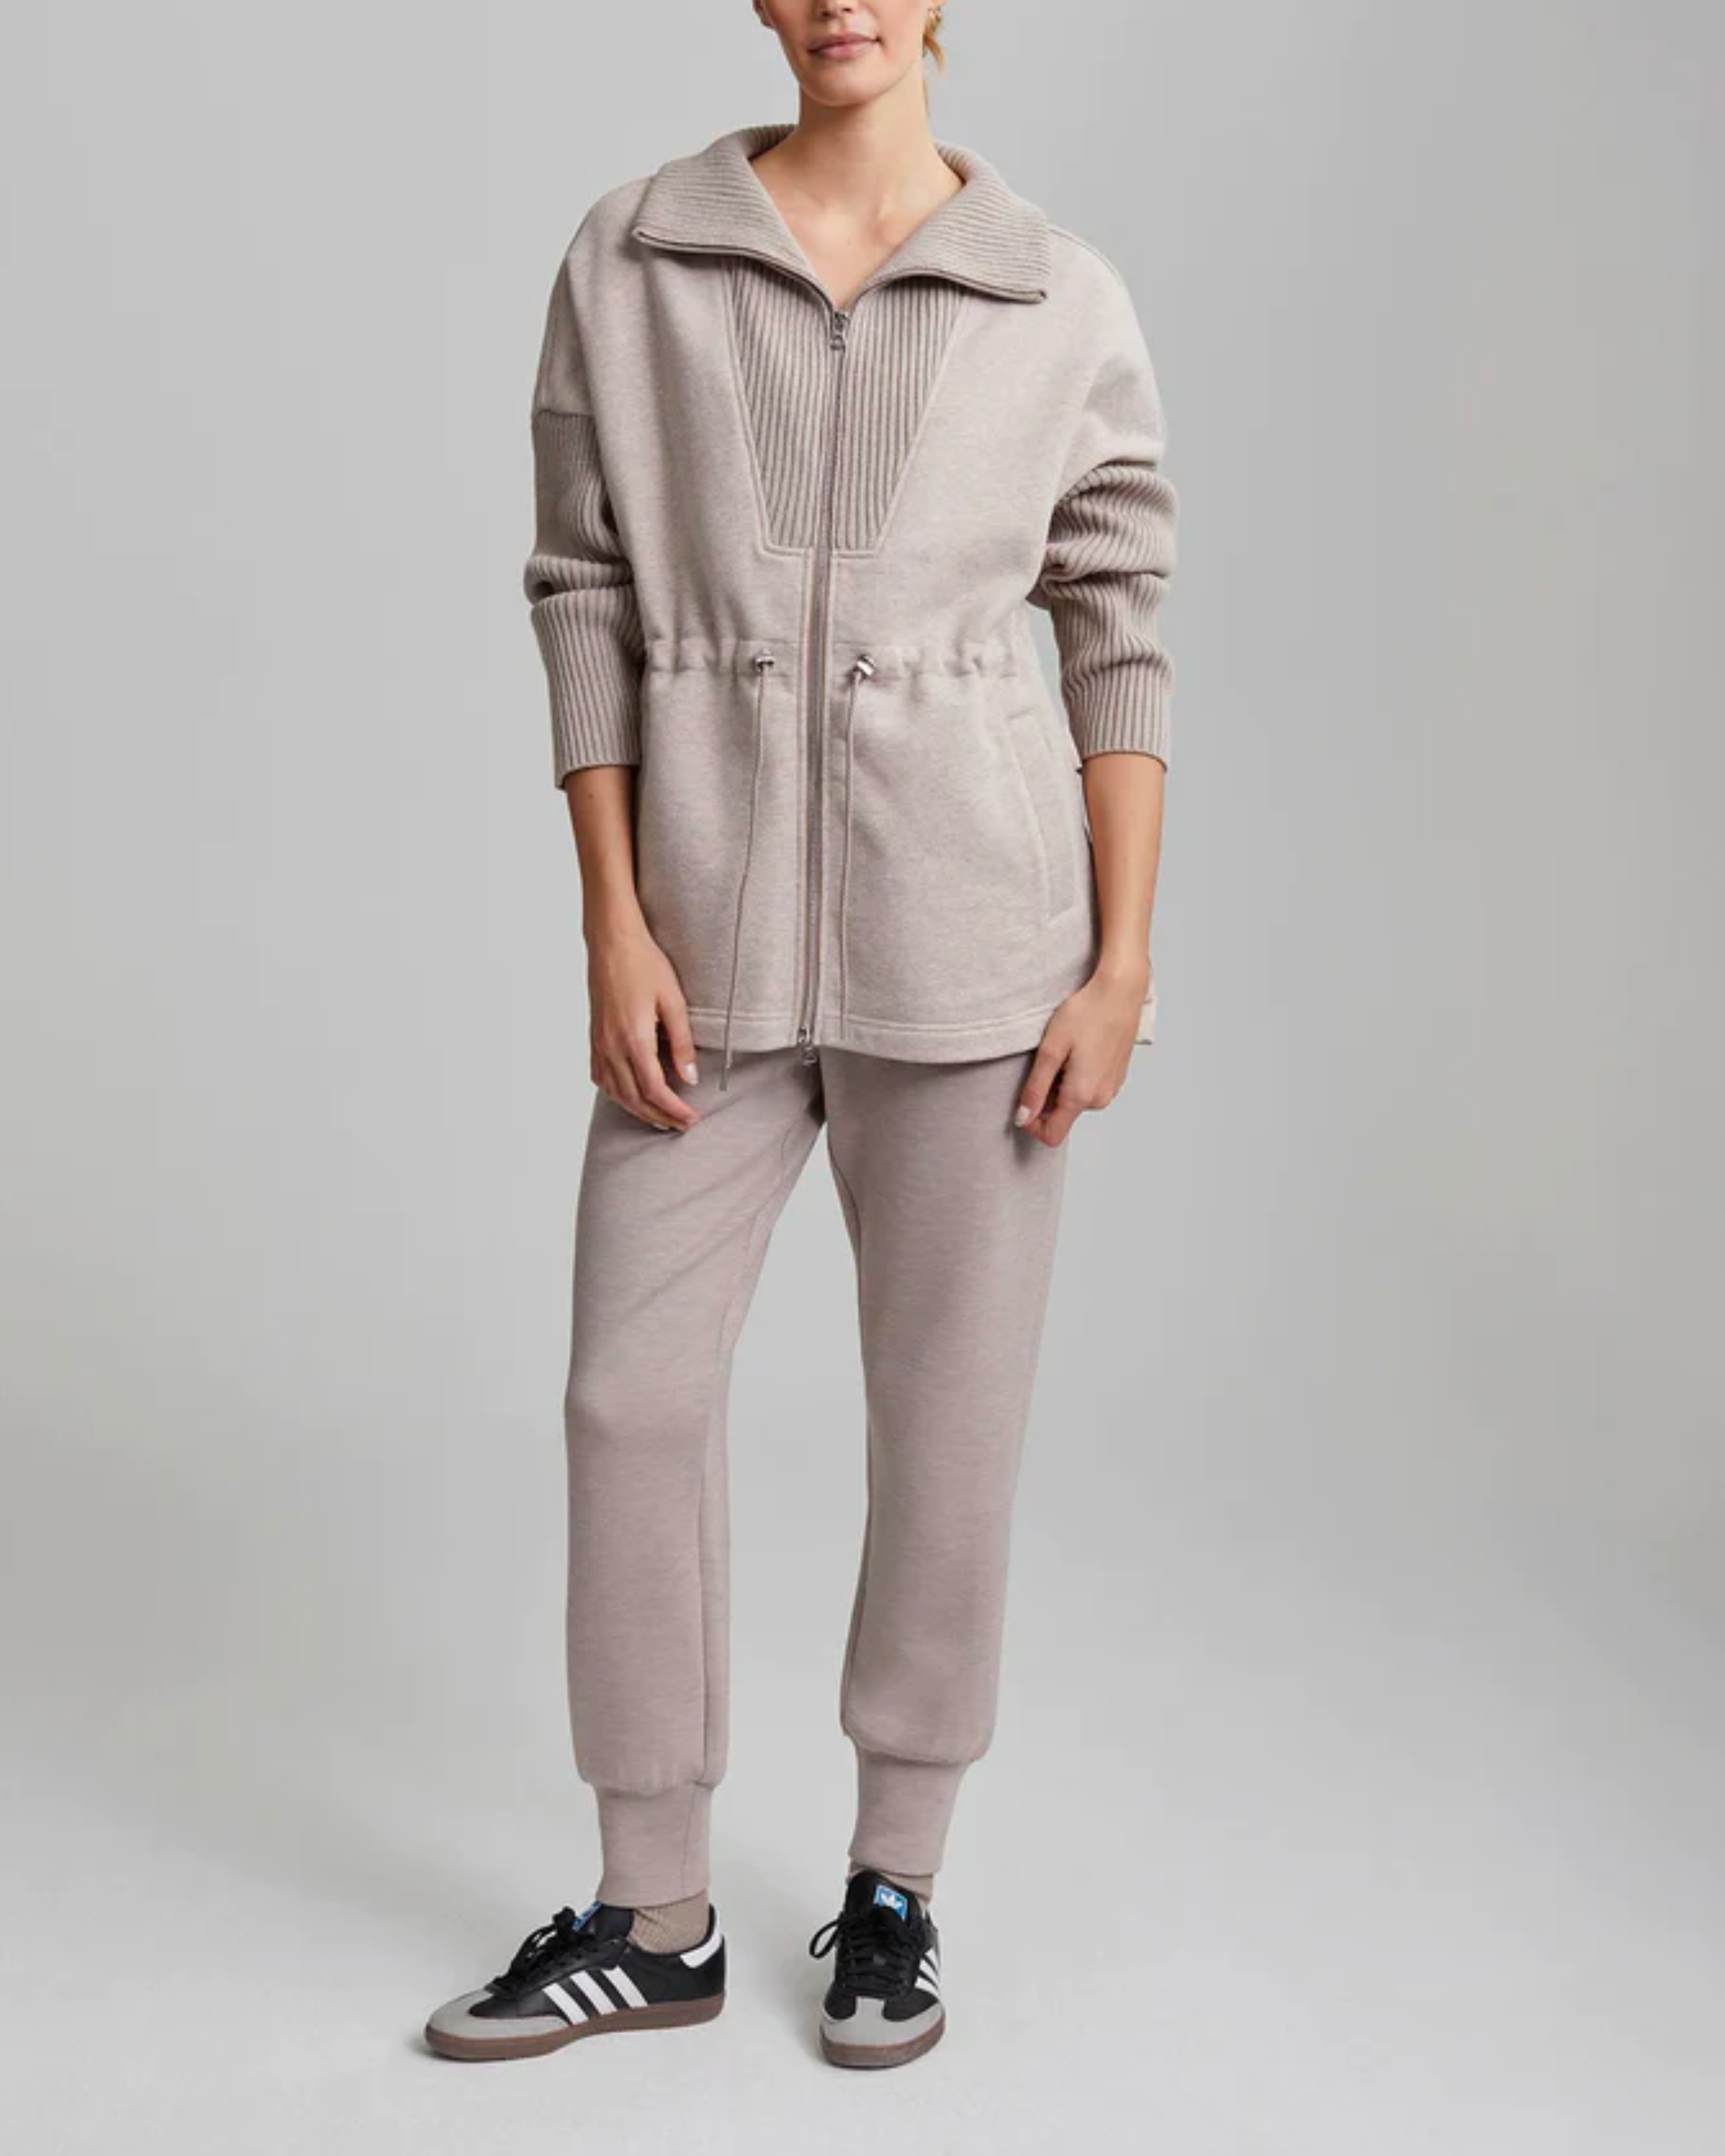 Varley Cotswold Longline Zip Through in Taupe Marl